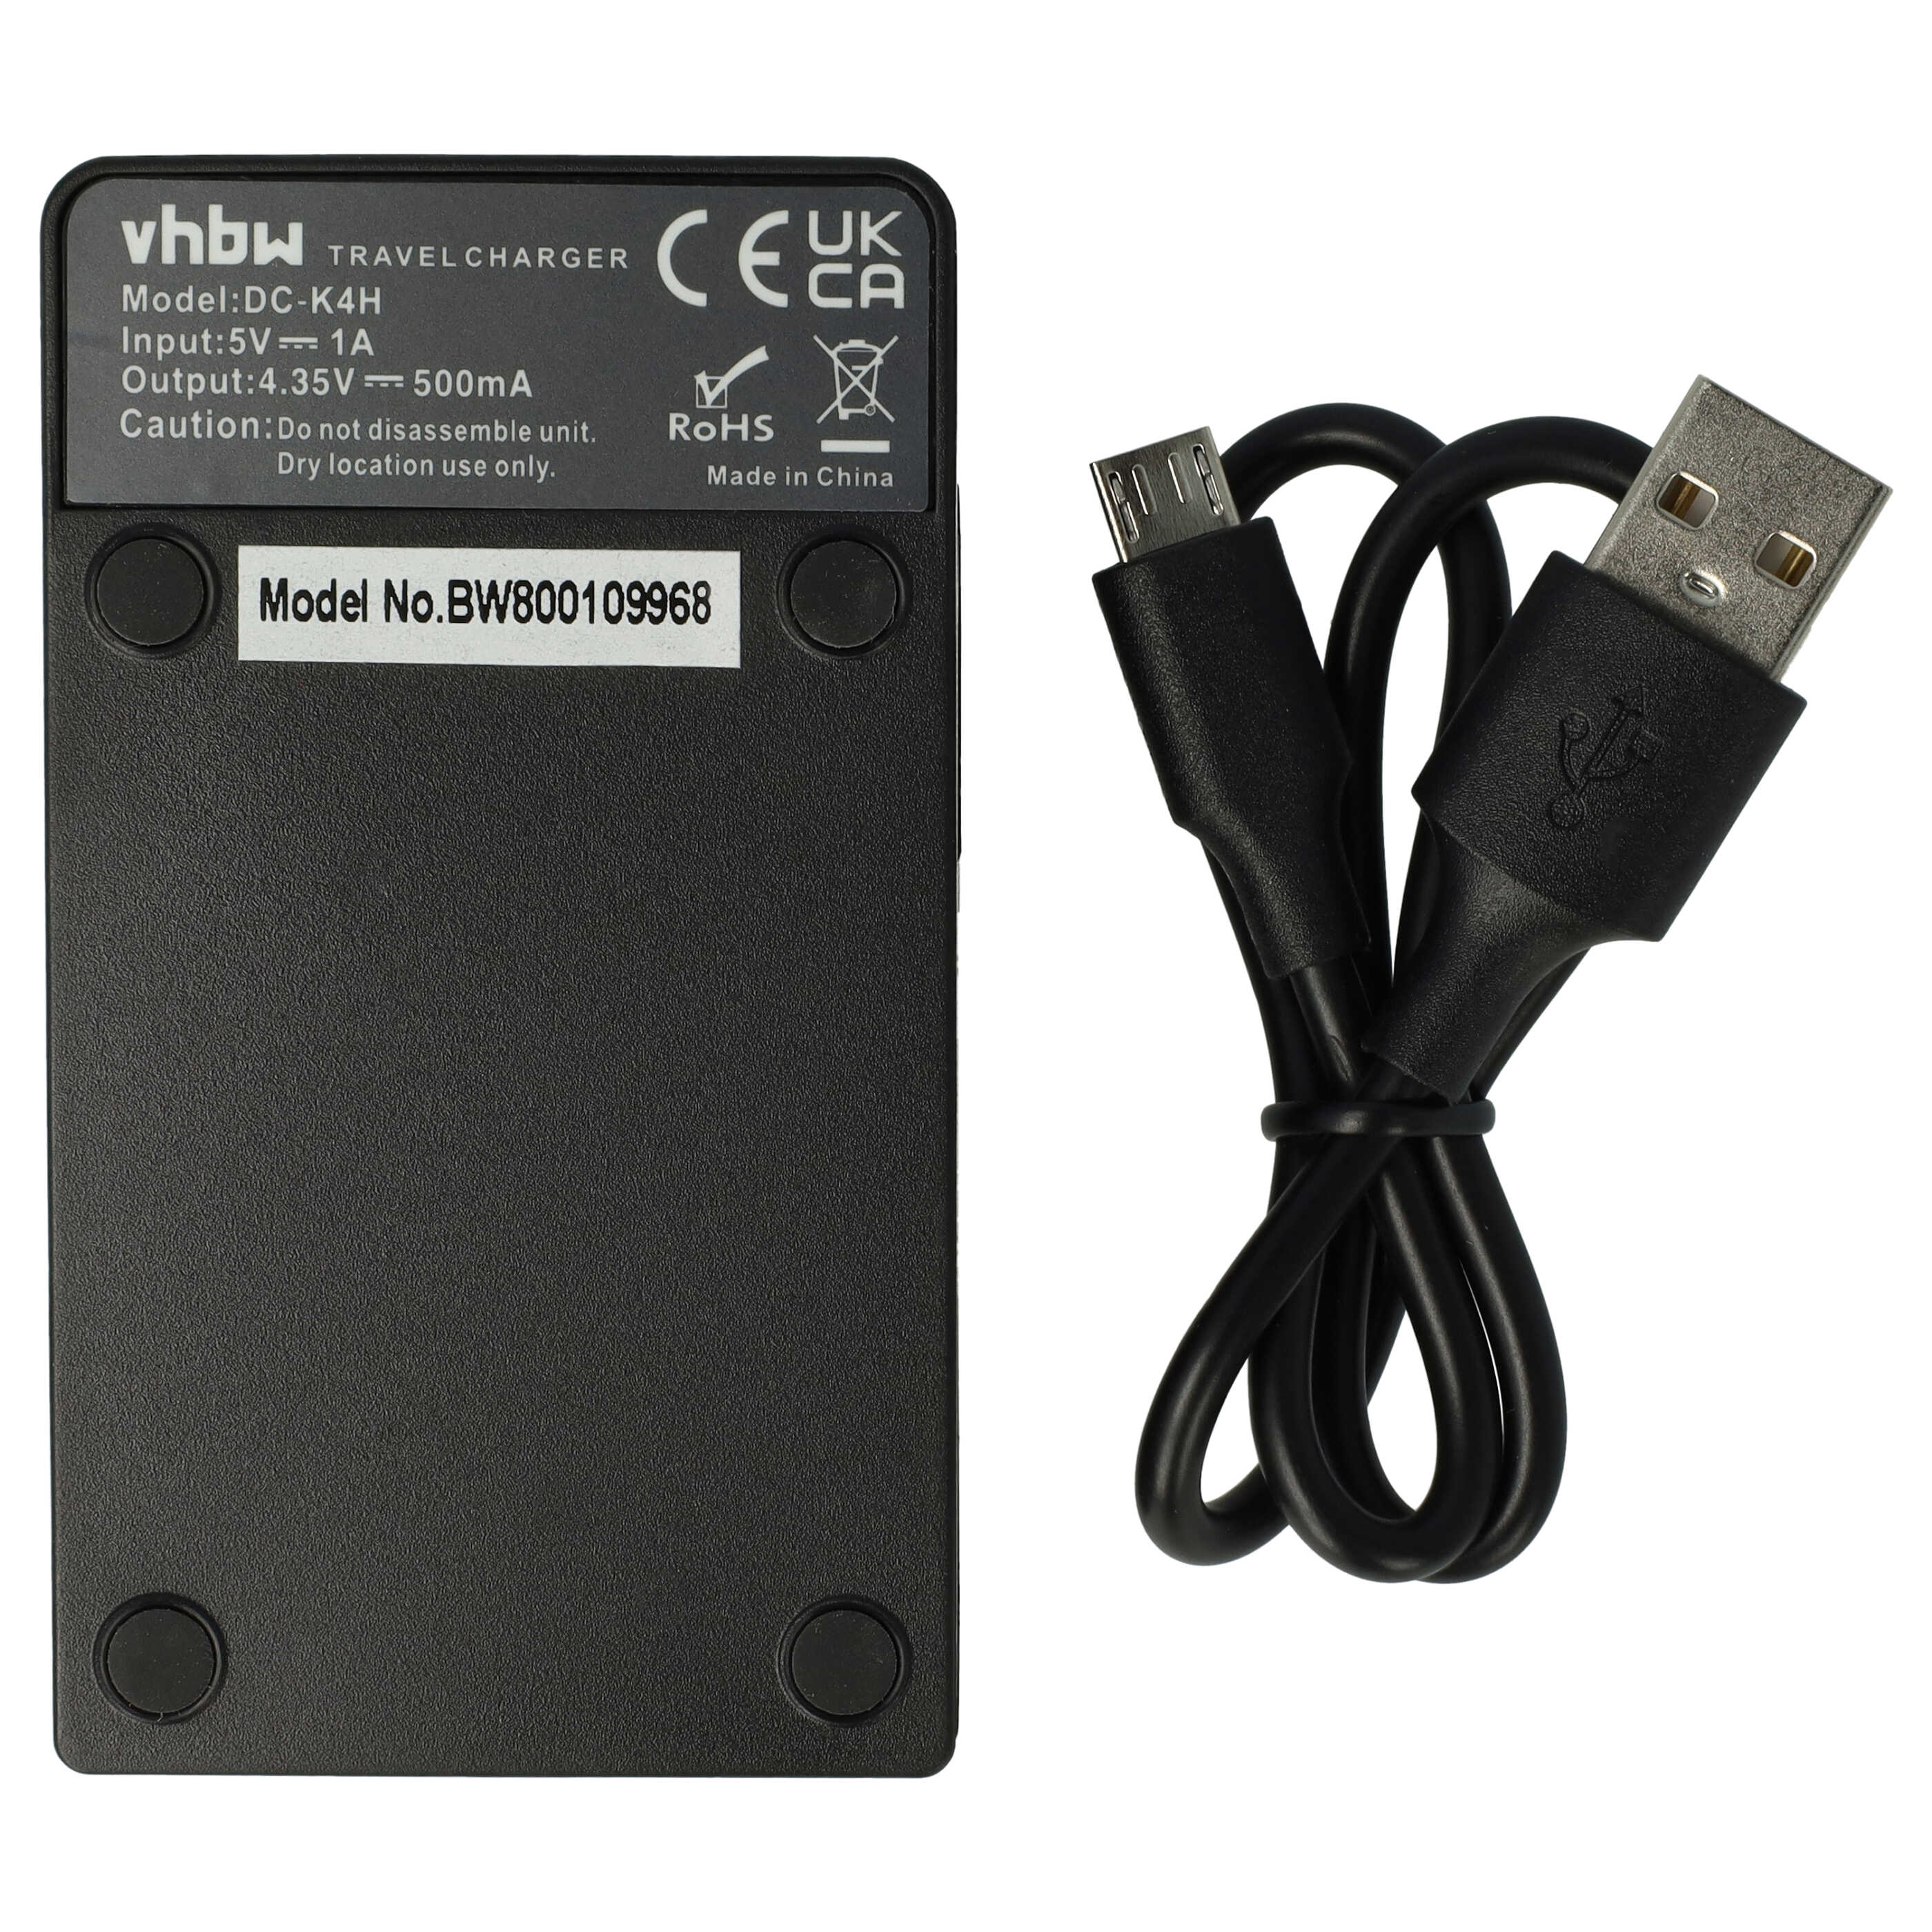 Battery Charger replaces Nikon MH-67P suitable for Coolpix P600 Camera etc. - 0.5 A, 4.35 V